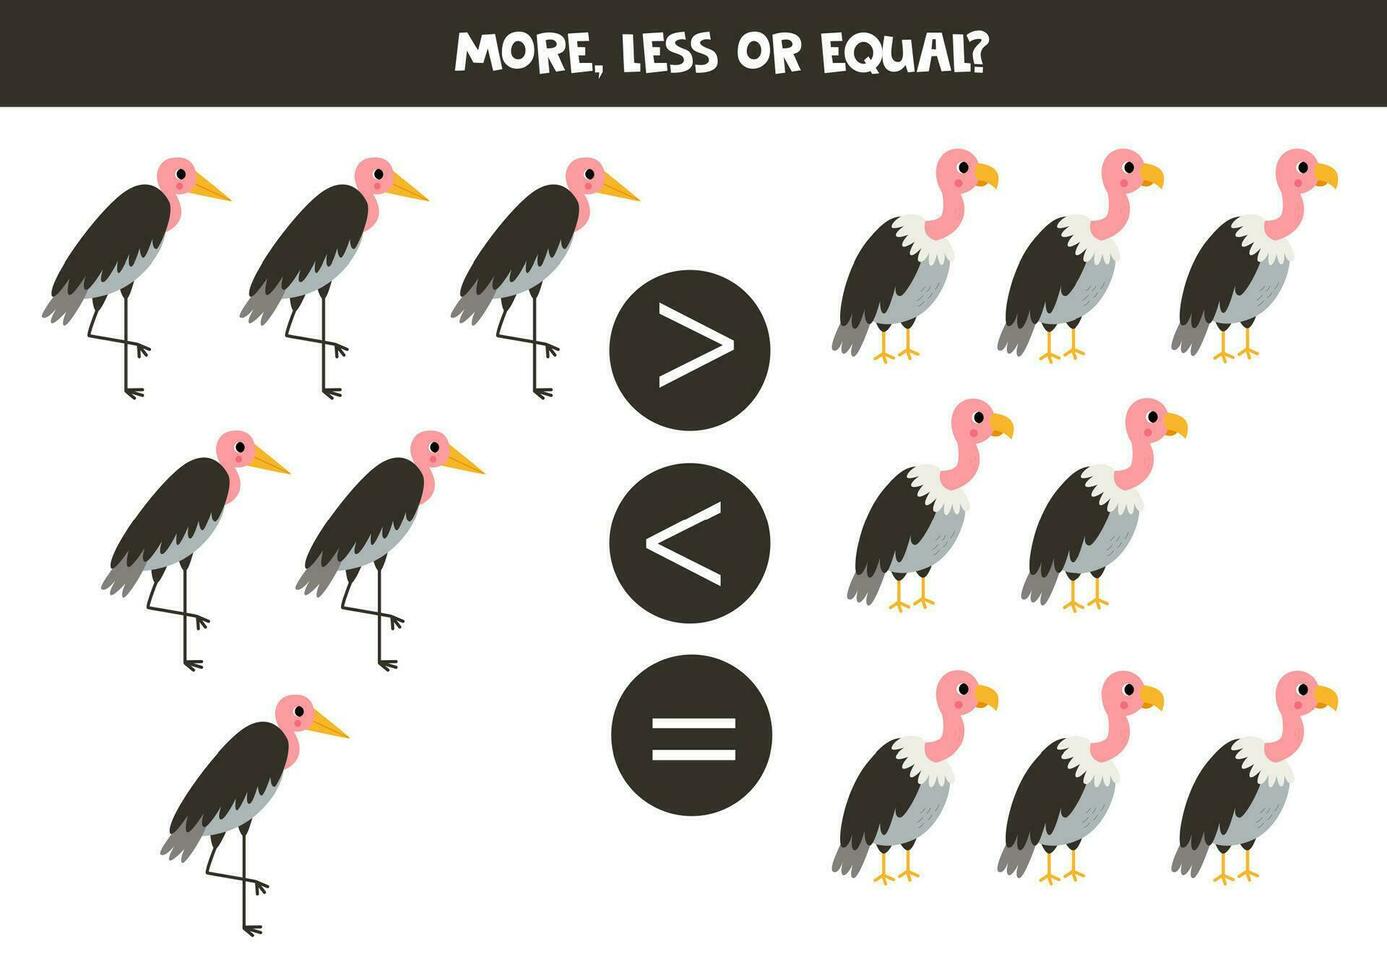 Grater, less or equal with cartoon marabous and vultures. vector